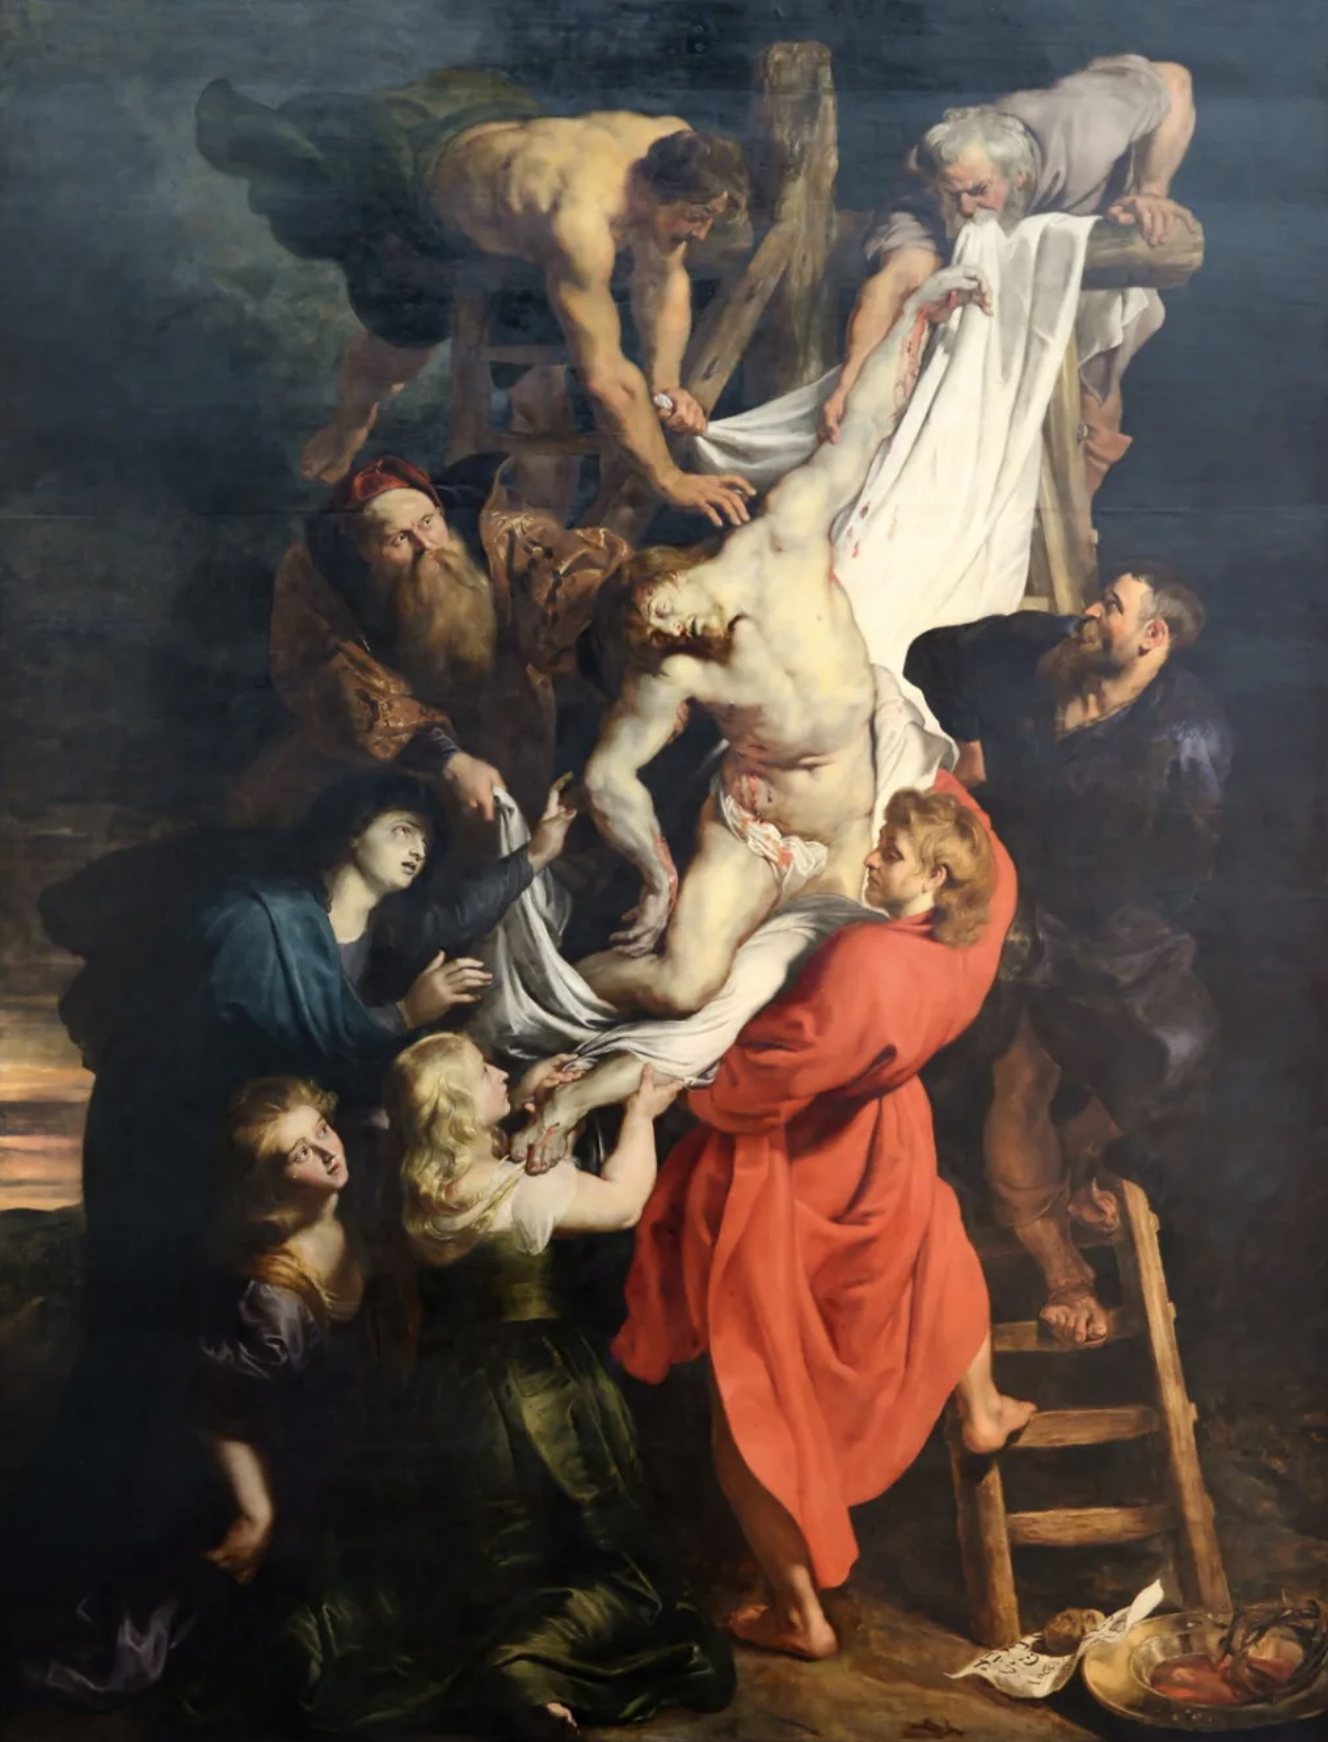 Peter Paul Rubens, Descent from the Cross, 1612-14. Oil on panel.